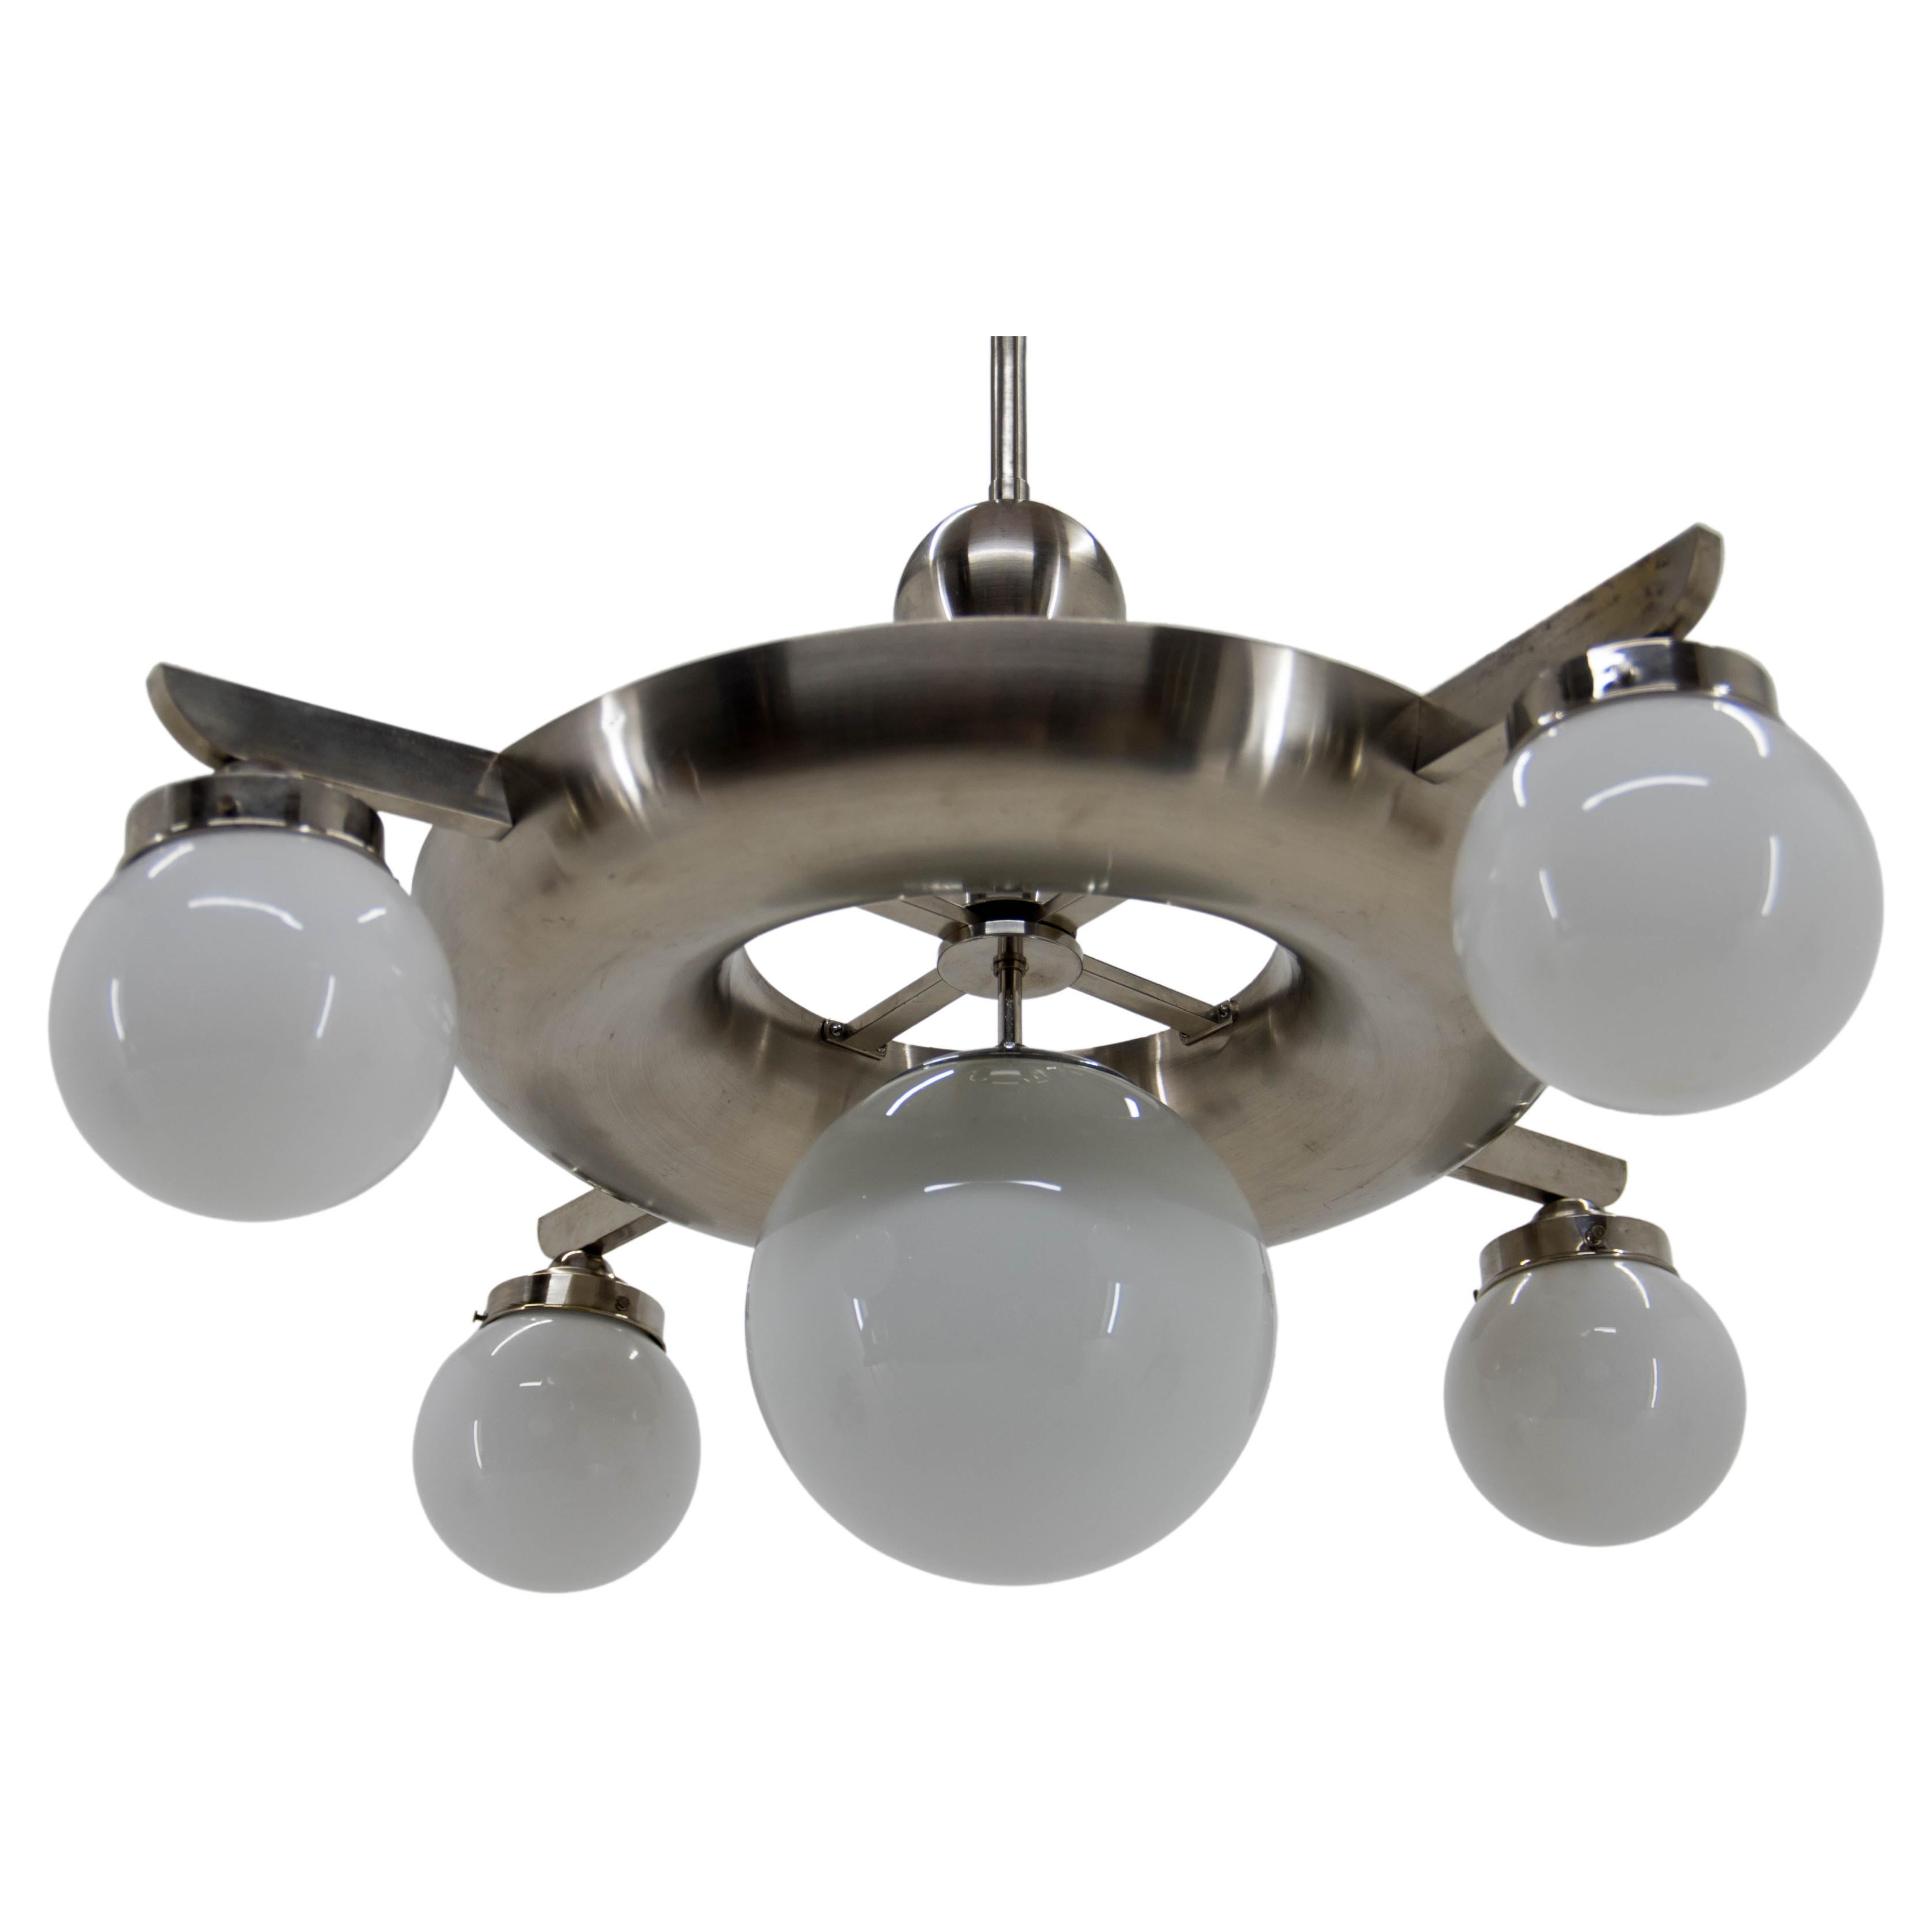 Rare Functionalism or Bauhaus Chandelier by IAS, 1920s For Sale